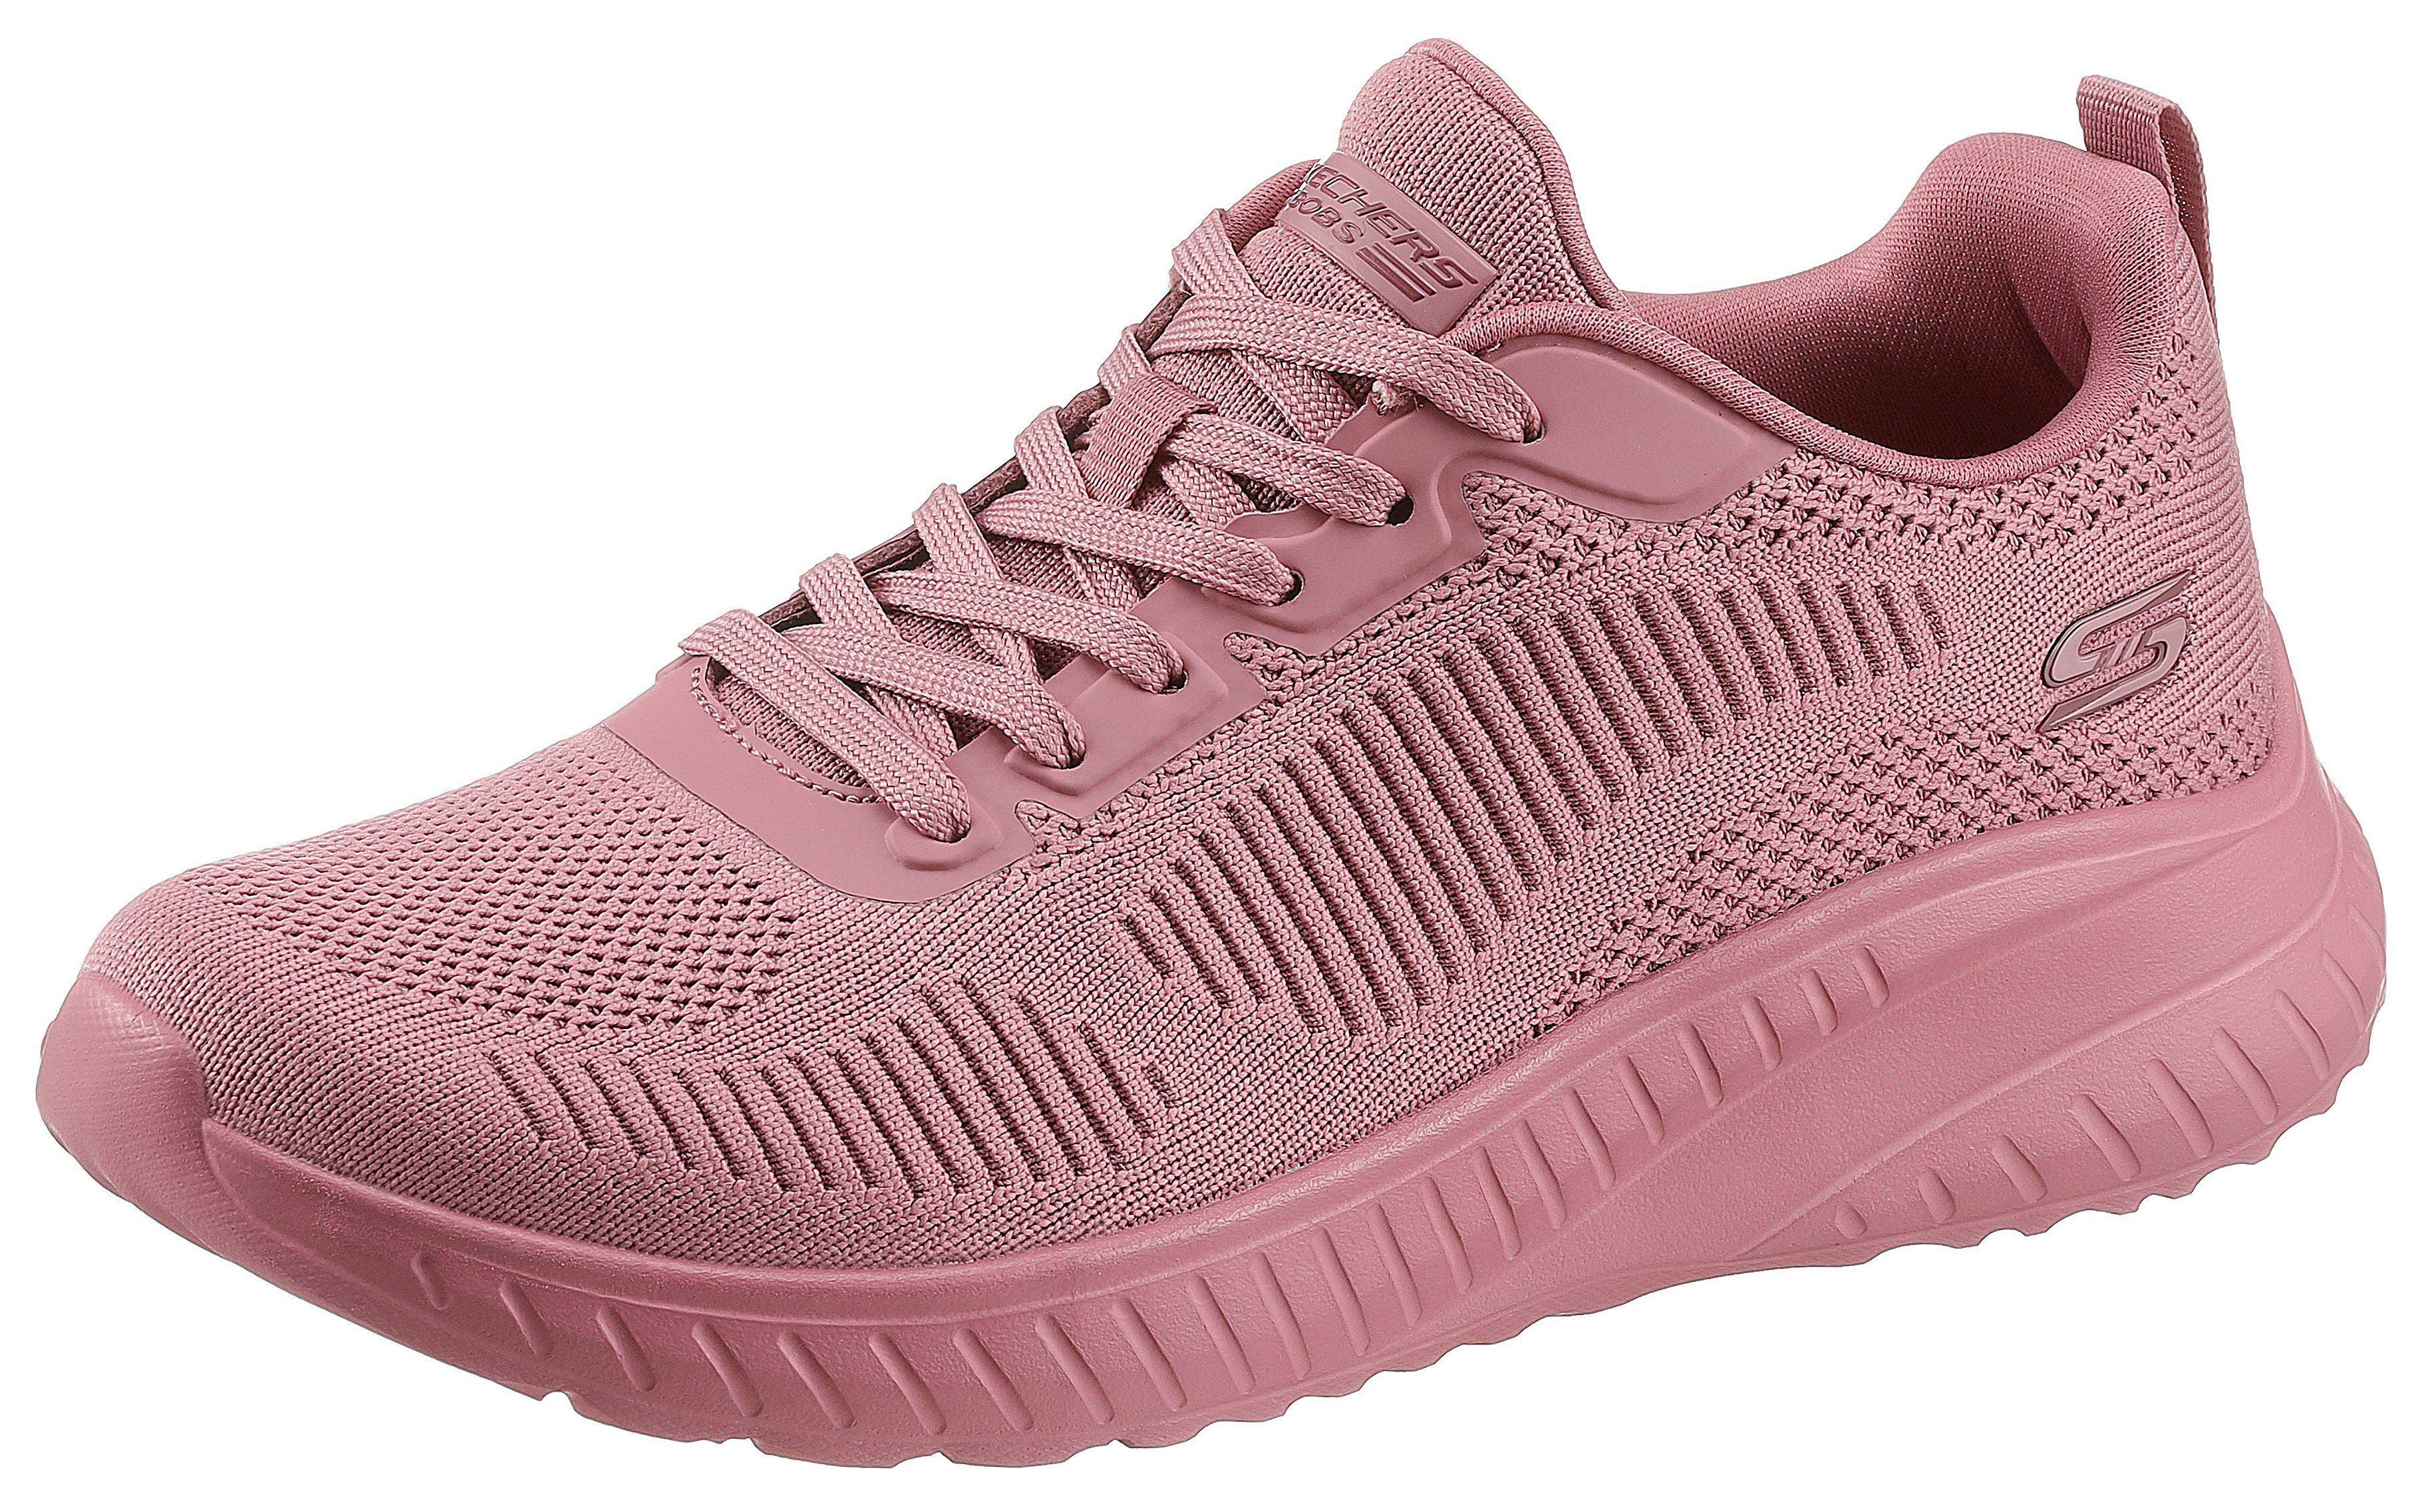 himbeere Skechers OFF Sneaker SQUAD Innensohle komfortabler mit BOBS CHAOS FACE